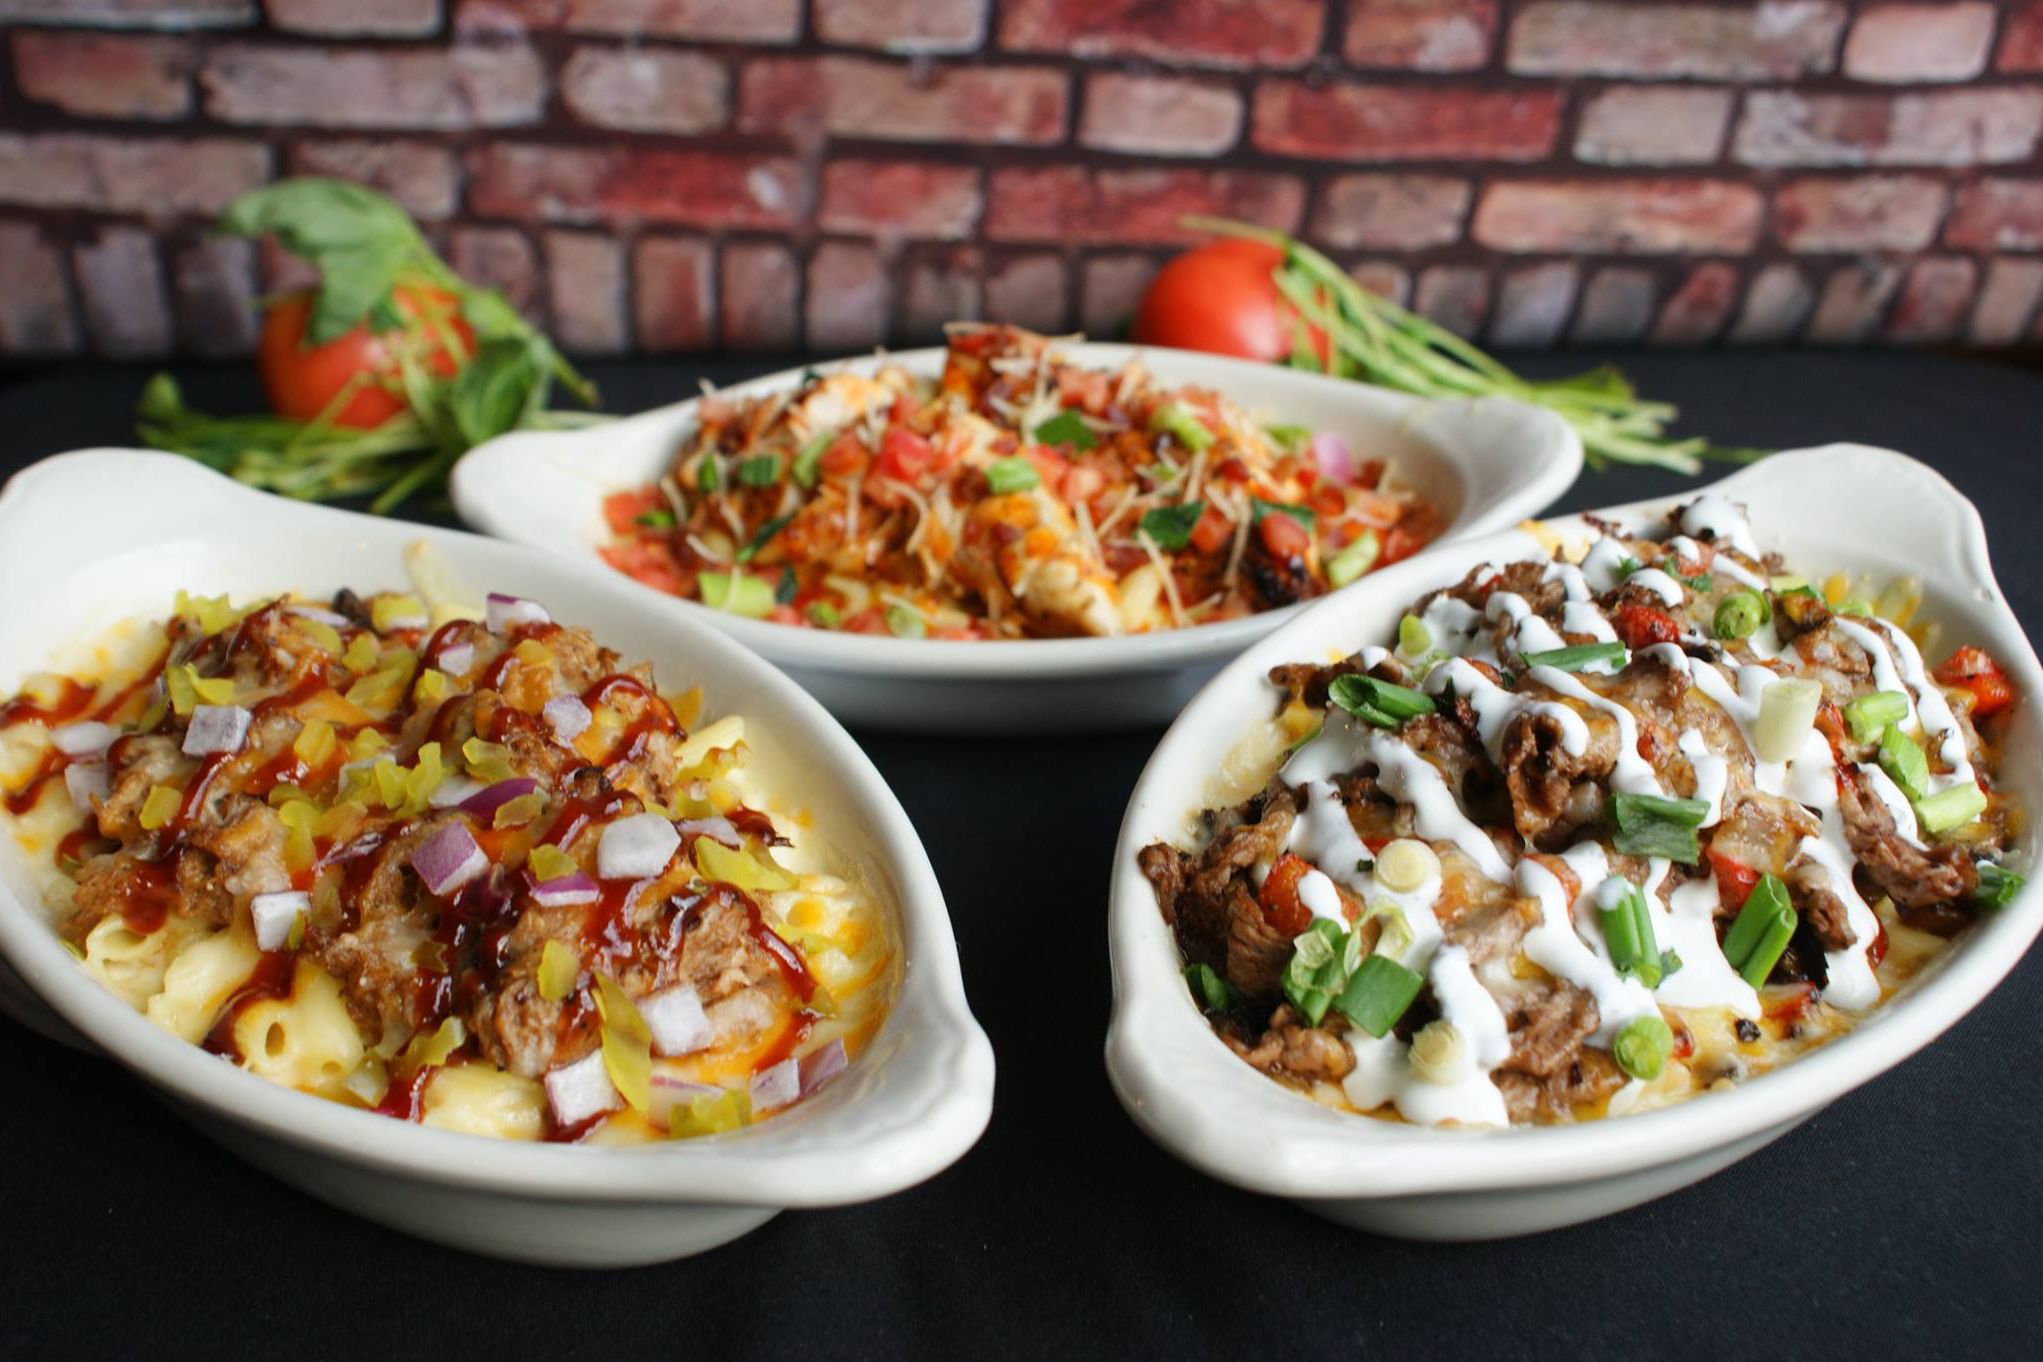 <p><b>Grand Island, Nebraska</b><br><br>All-day breakfast as well as steaks, salads, wraps, artisan pizzas, angus burgers, and specialty mac and cheese bowls mean solid online reviews for <a href="https://www.thunderroadgrill.net/menus">Max's Thunder Road Grill</a>, off Interstate 80 inside the <a href="https://www.bosselman.com/travelcenter/">Bosselman Travel Center</a>. It's got friendly staff, good food, and decor — mostly old cars and motorcycles hanging from the walls. Also on site is Phoenix Massage Therapy, which offers 60-minute massages for $70.</p>